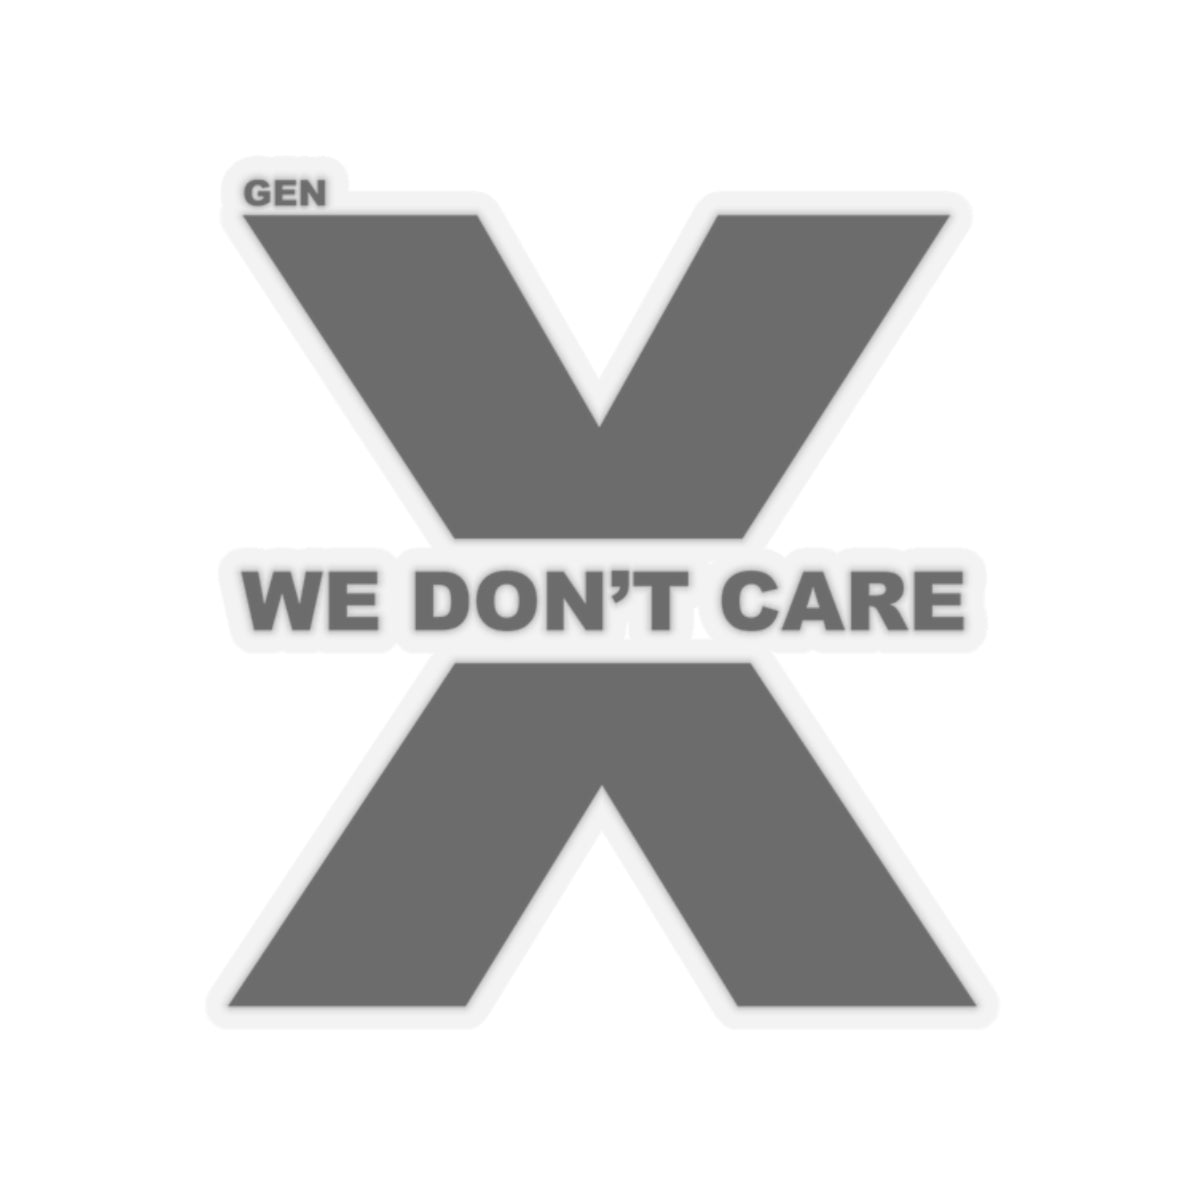 Trans Gen X -We Don't Care - Sticker By Generation Mood